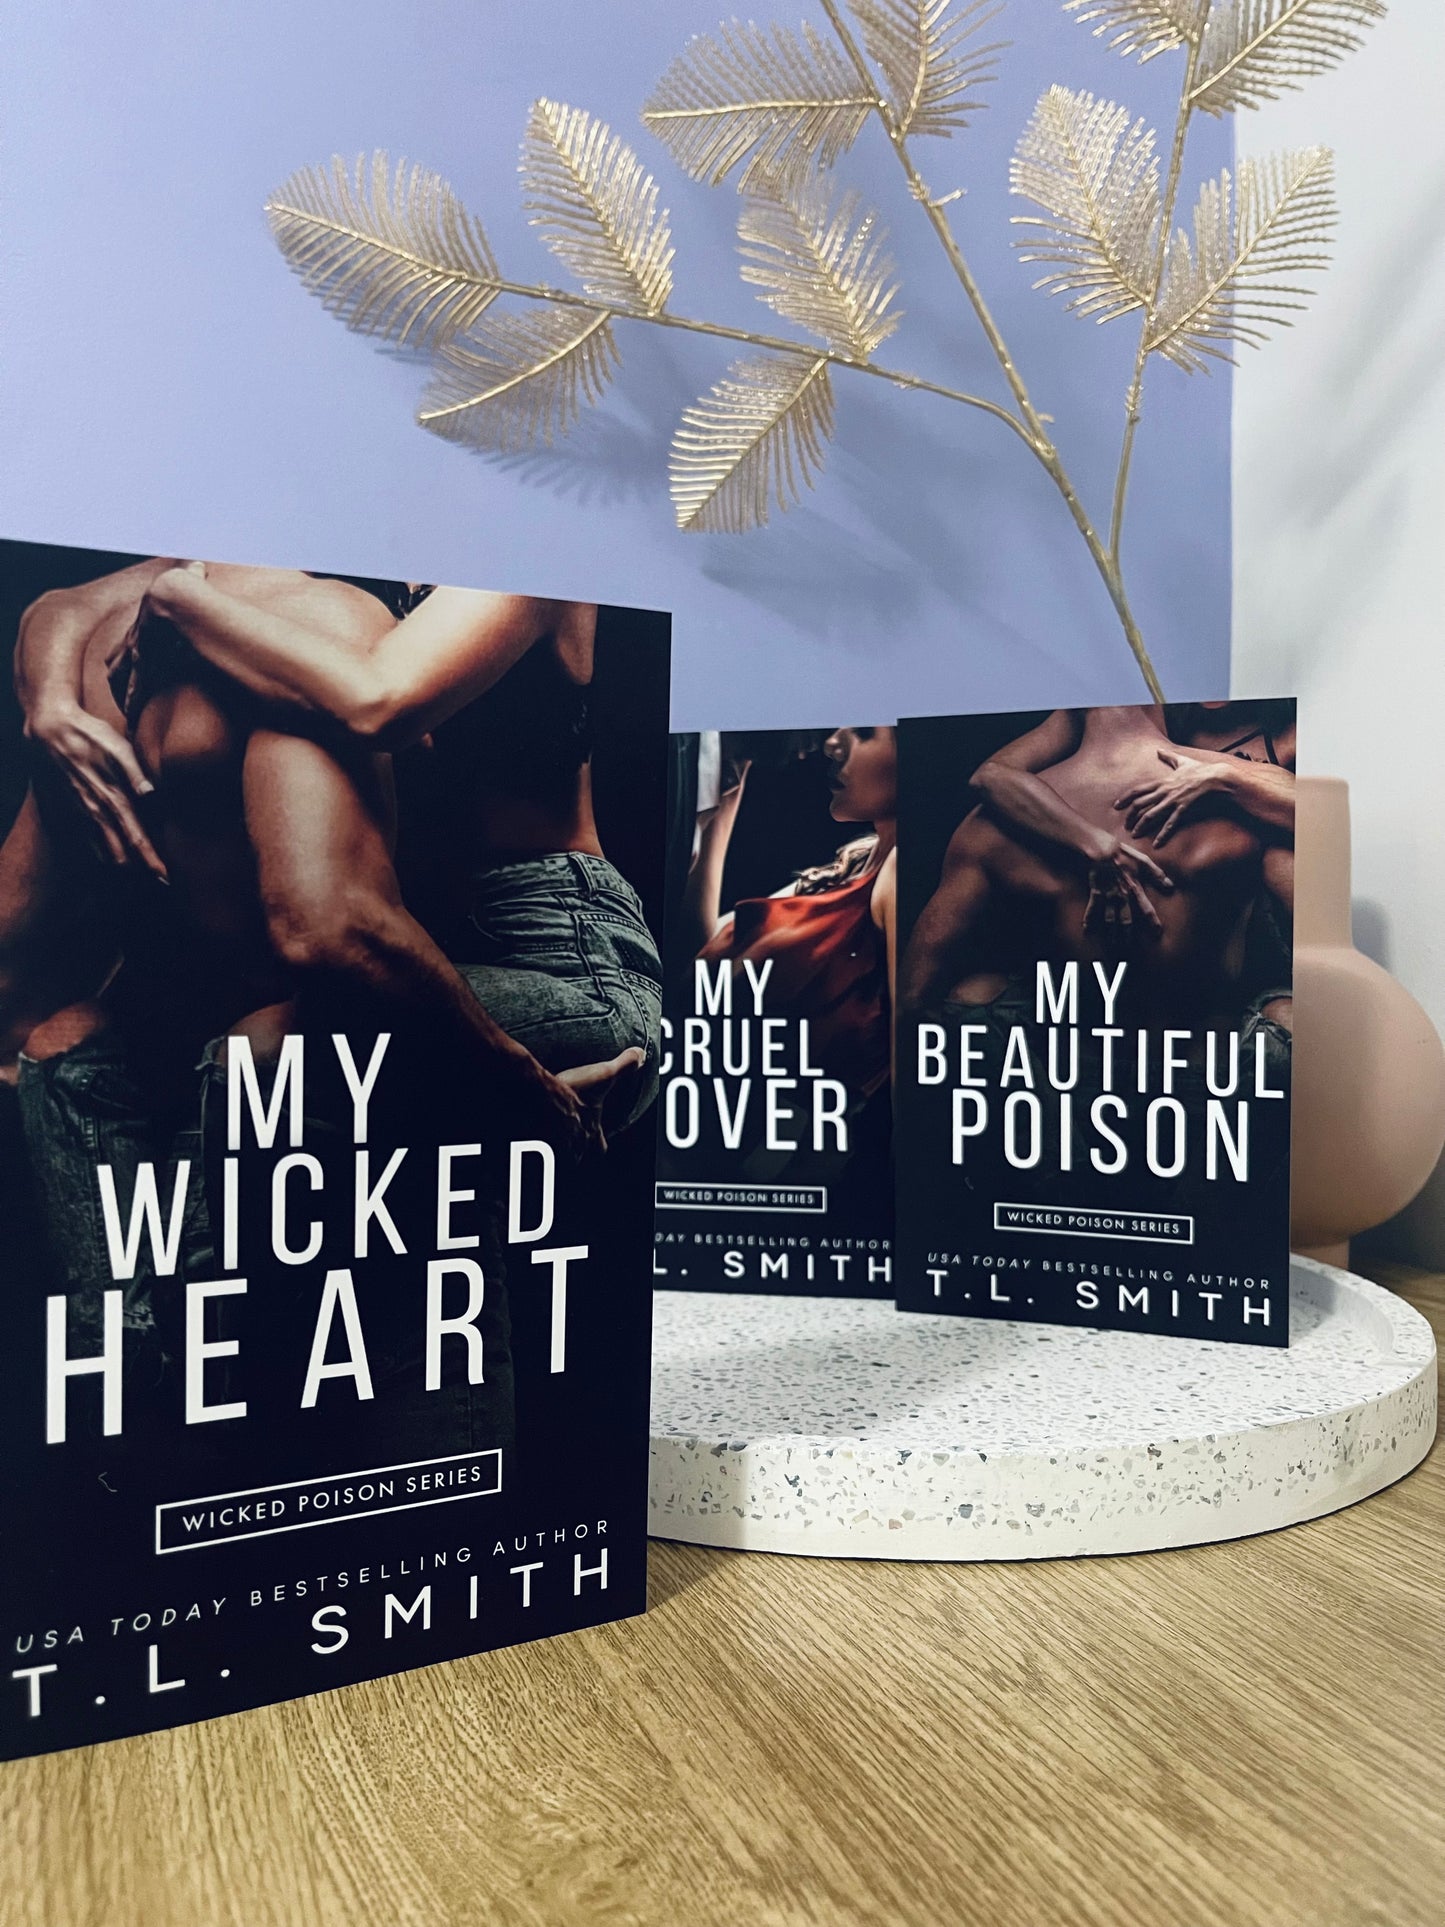 My Wicked Heart by T.L. Smith (Wicked Poison Book 2)